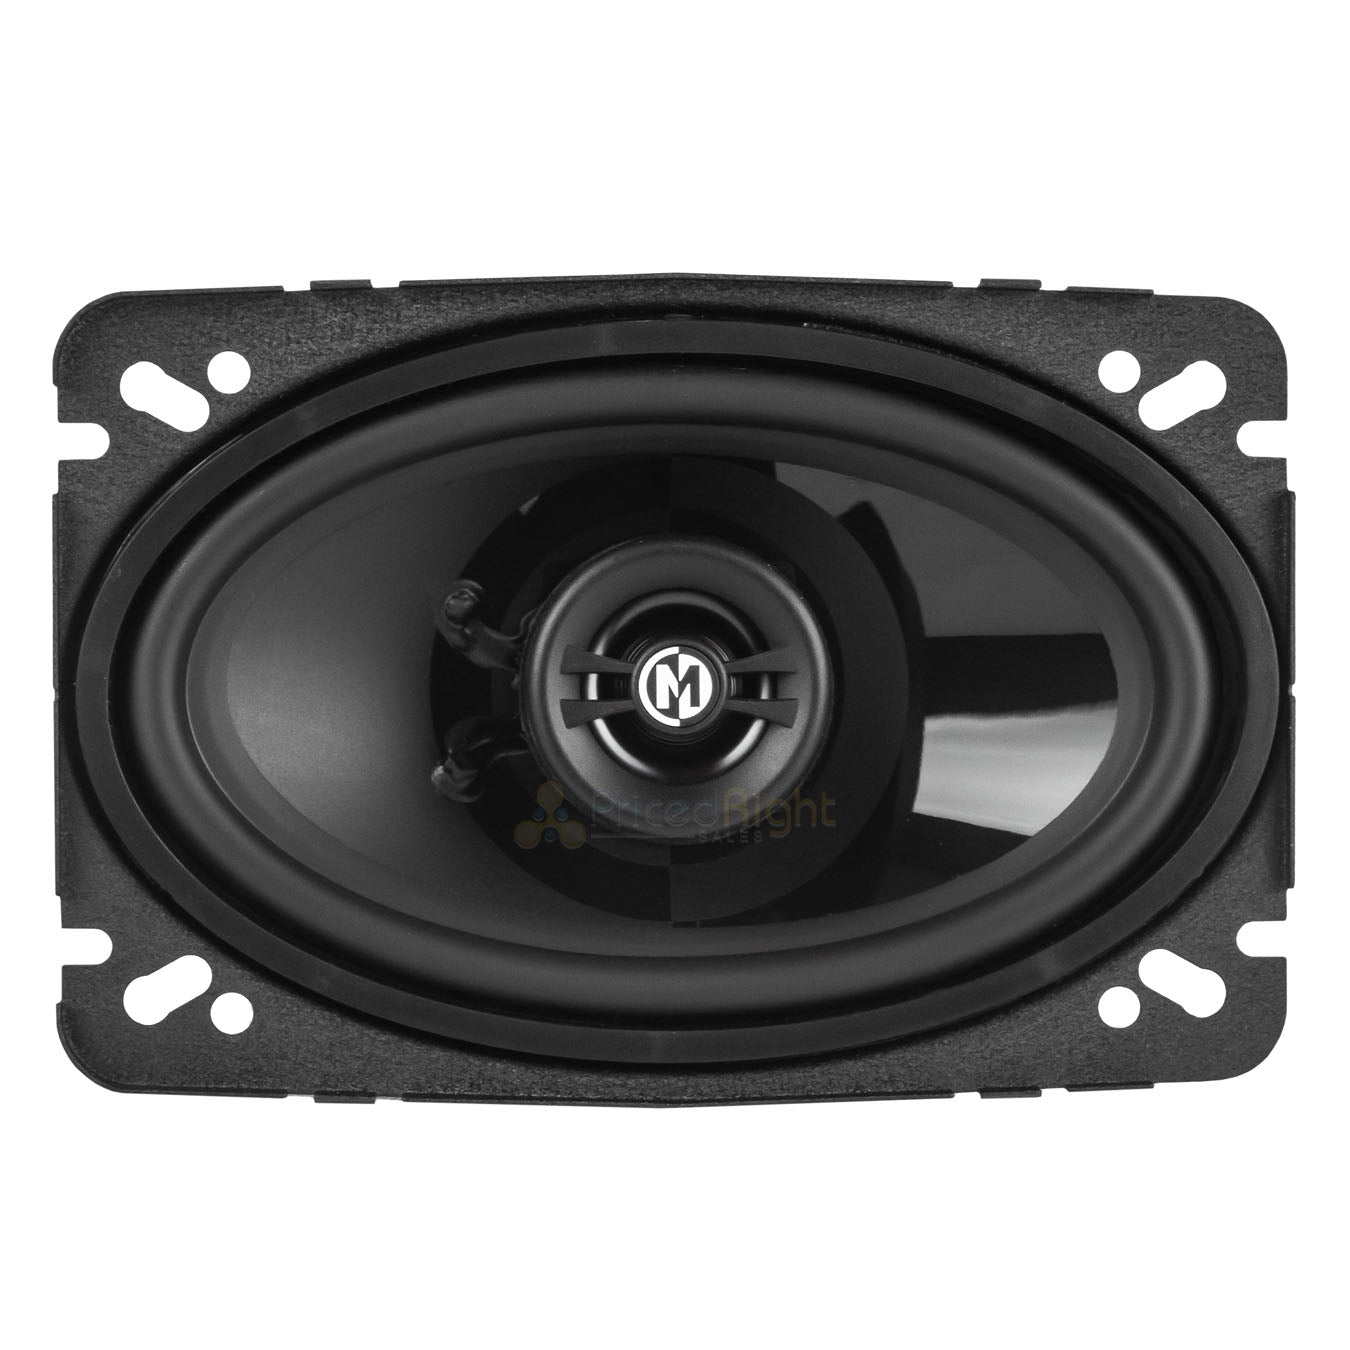 Memphis Audio 4x6 Inch 2 Way Coaxial Speakers 60W Max Power Reference PRX46 Pair